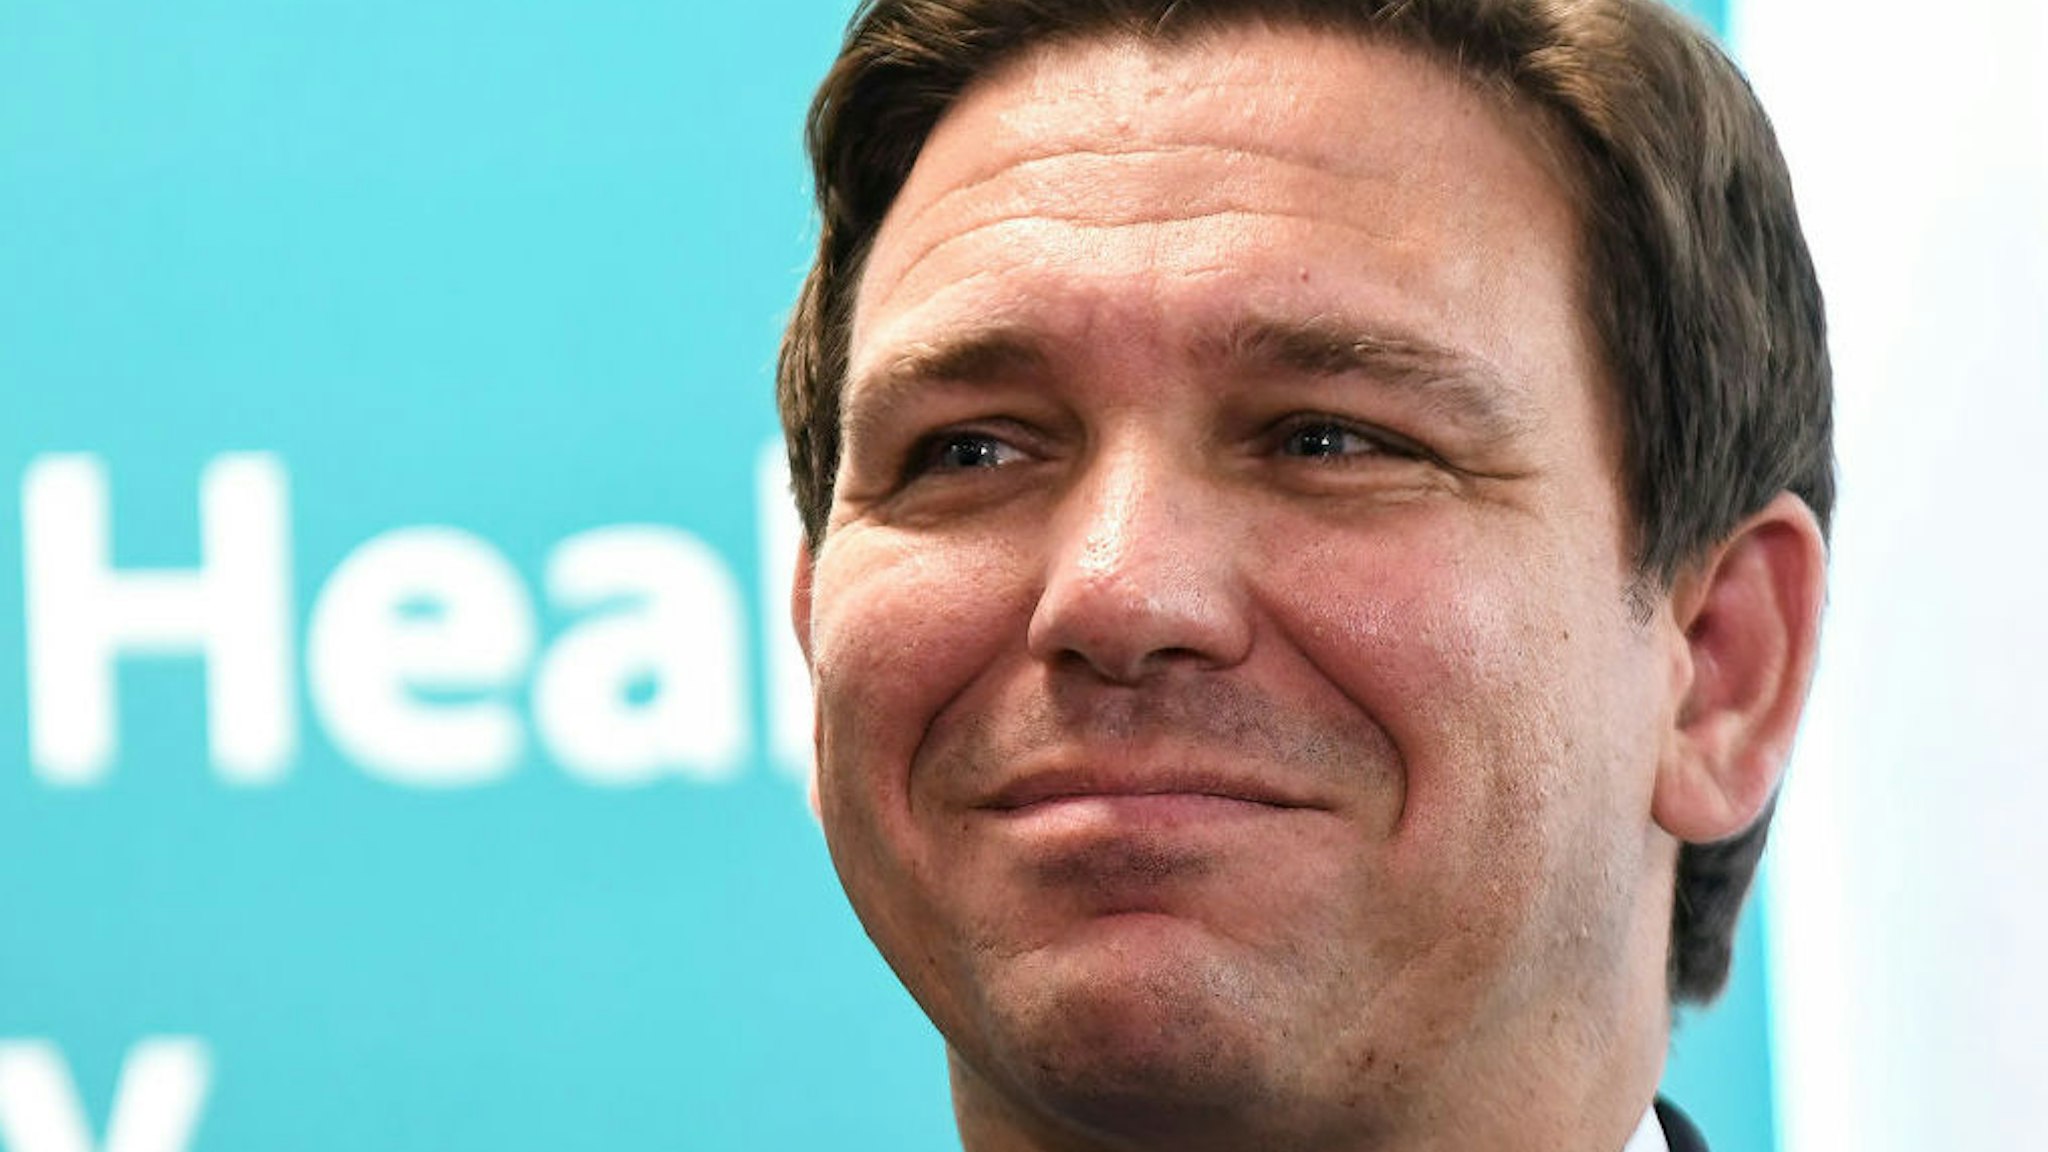 Florida Governor Ron DeSantis holds a news conference at the Florida Department of Health office in Viera, Florida to announce that the state of Florida has provided more than 40,000 monoclonal antibody treatments to COVID-19 patients statewide at 21 state treatment sites.